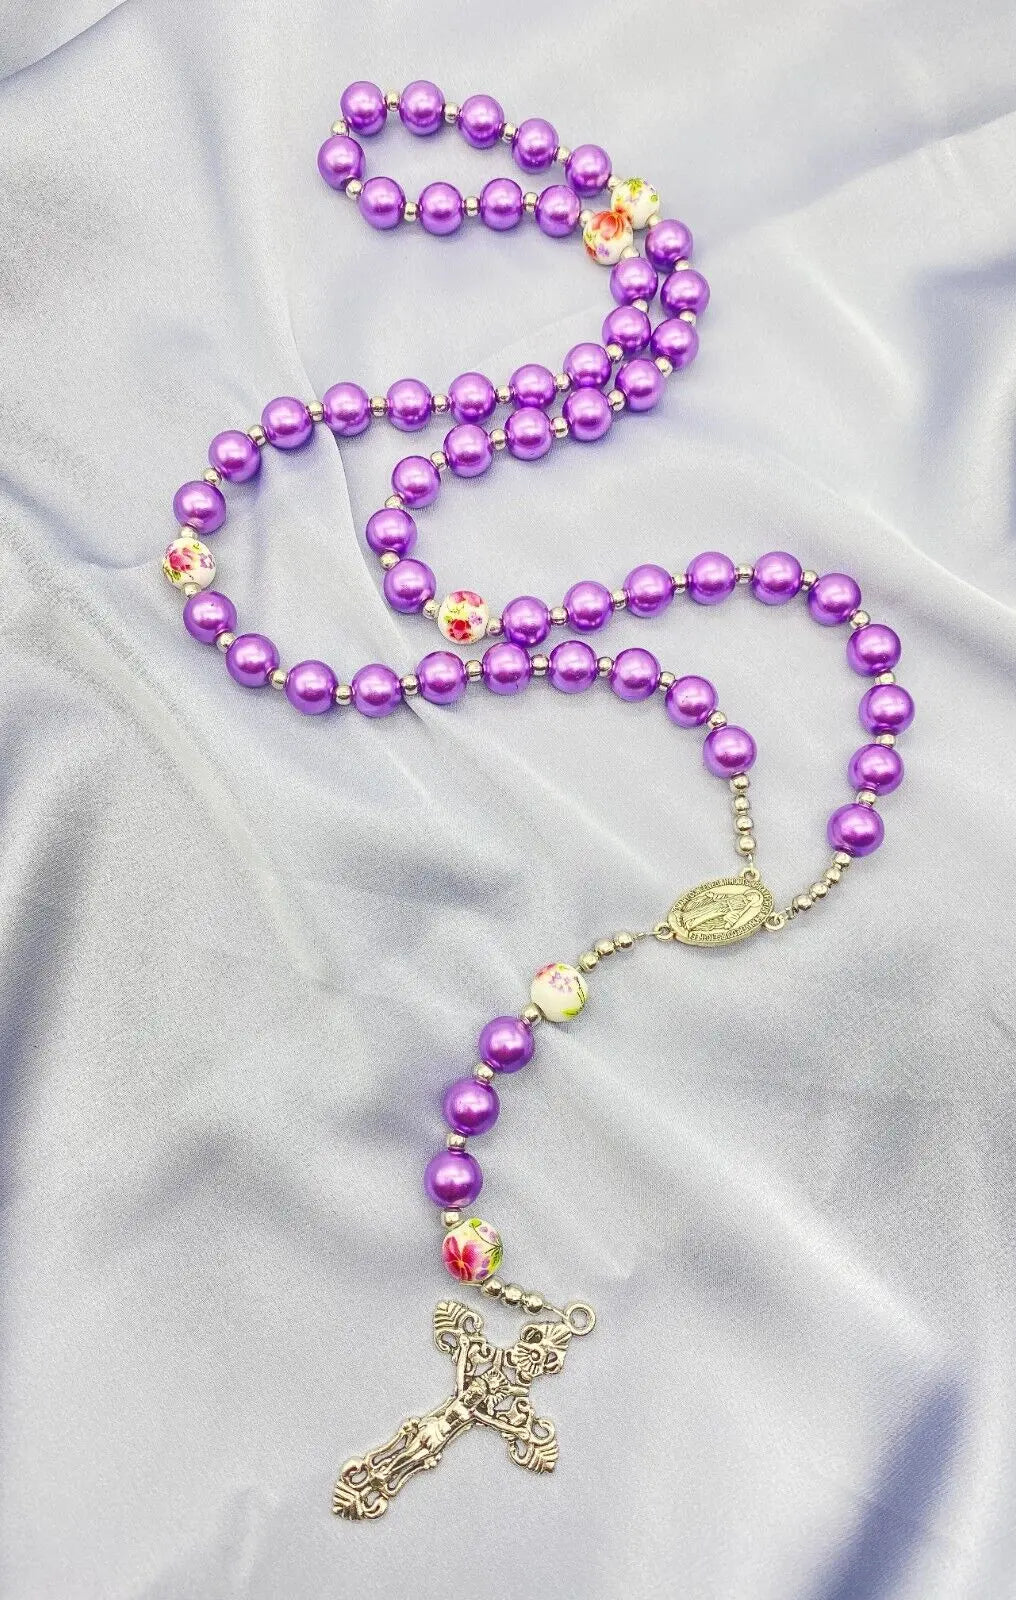 Purple Pearl Beads Rosary Flowers 20" Beaded Necklace Miraculous Medal & Cross